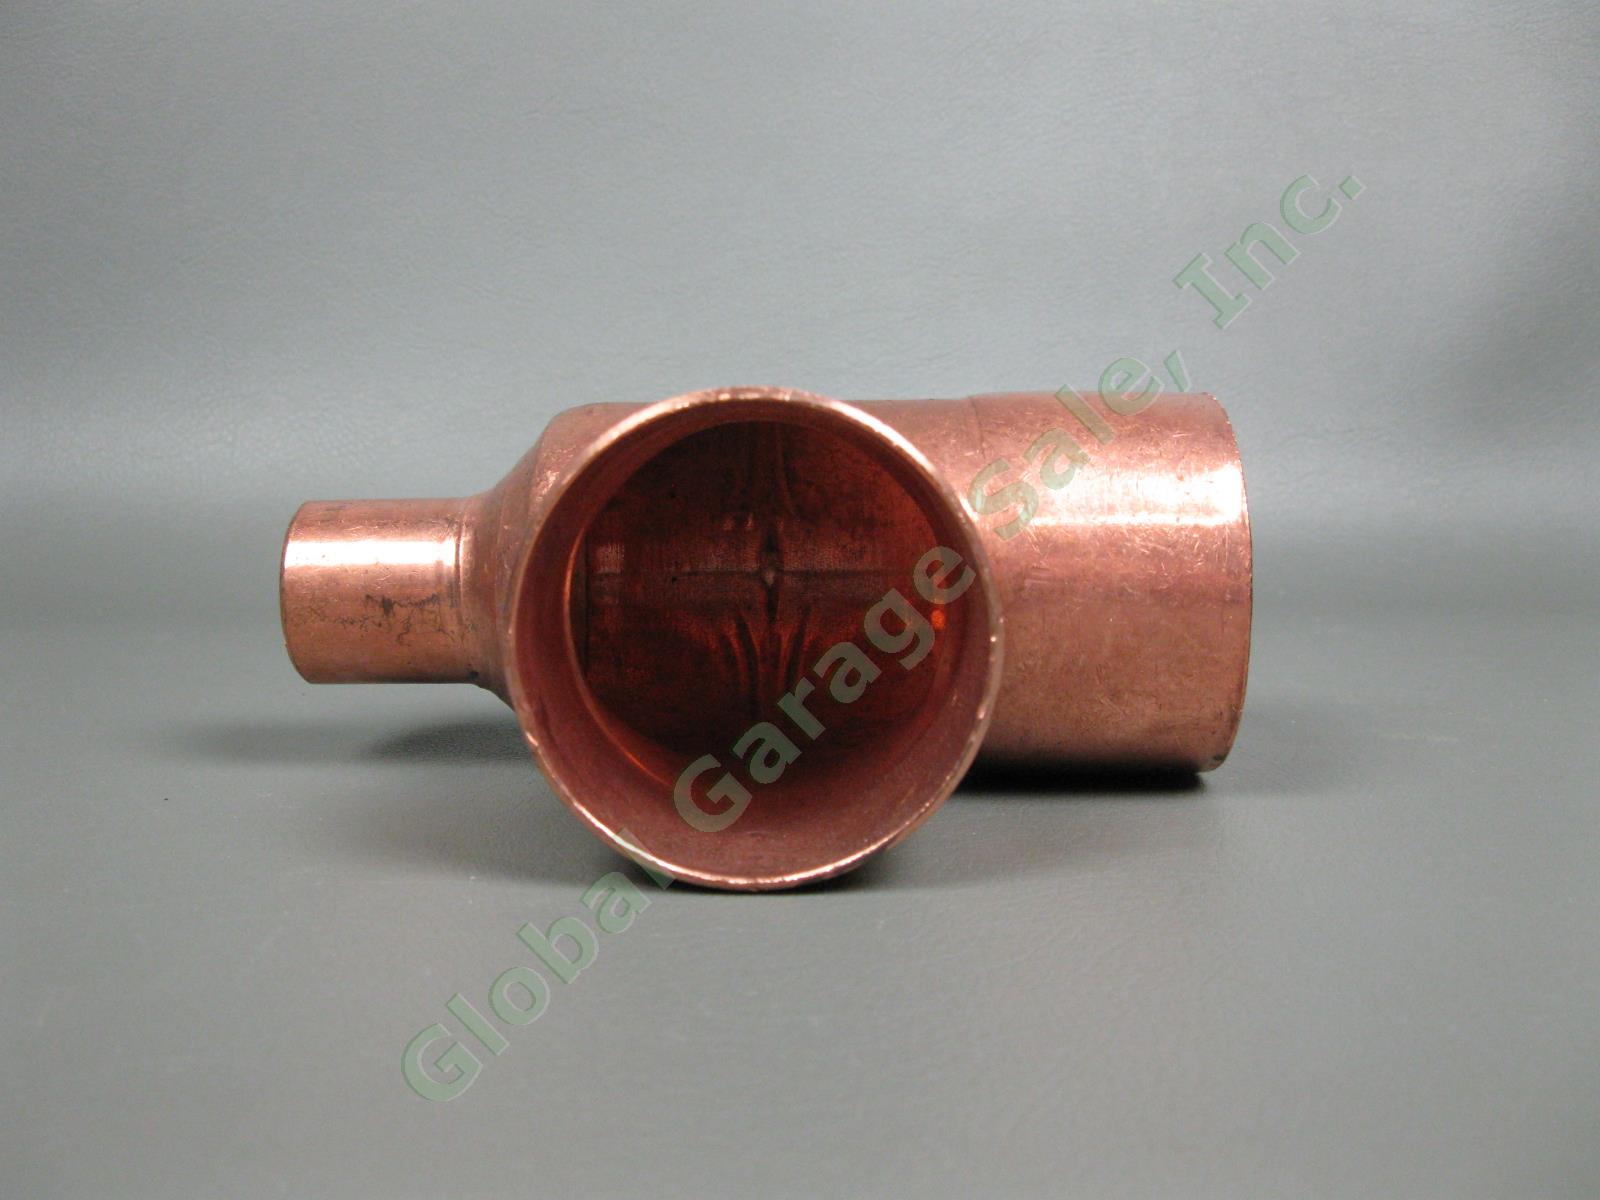 NEW 1" x 2" x 2" Copper EPC Reducing Sweat Tee Pipe Fitting Run Connection Eqpt 2